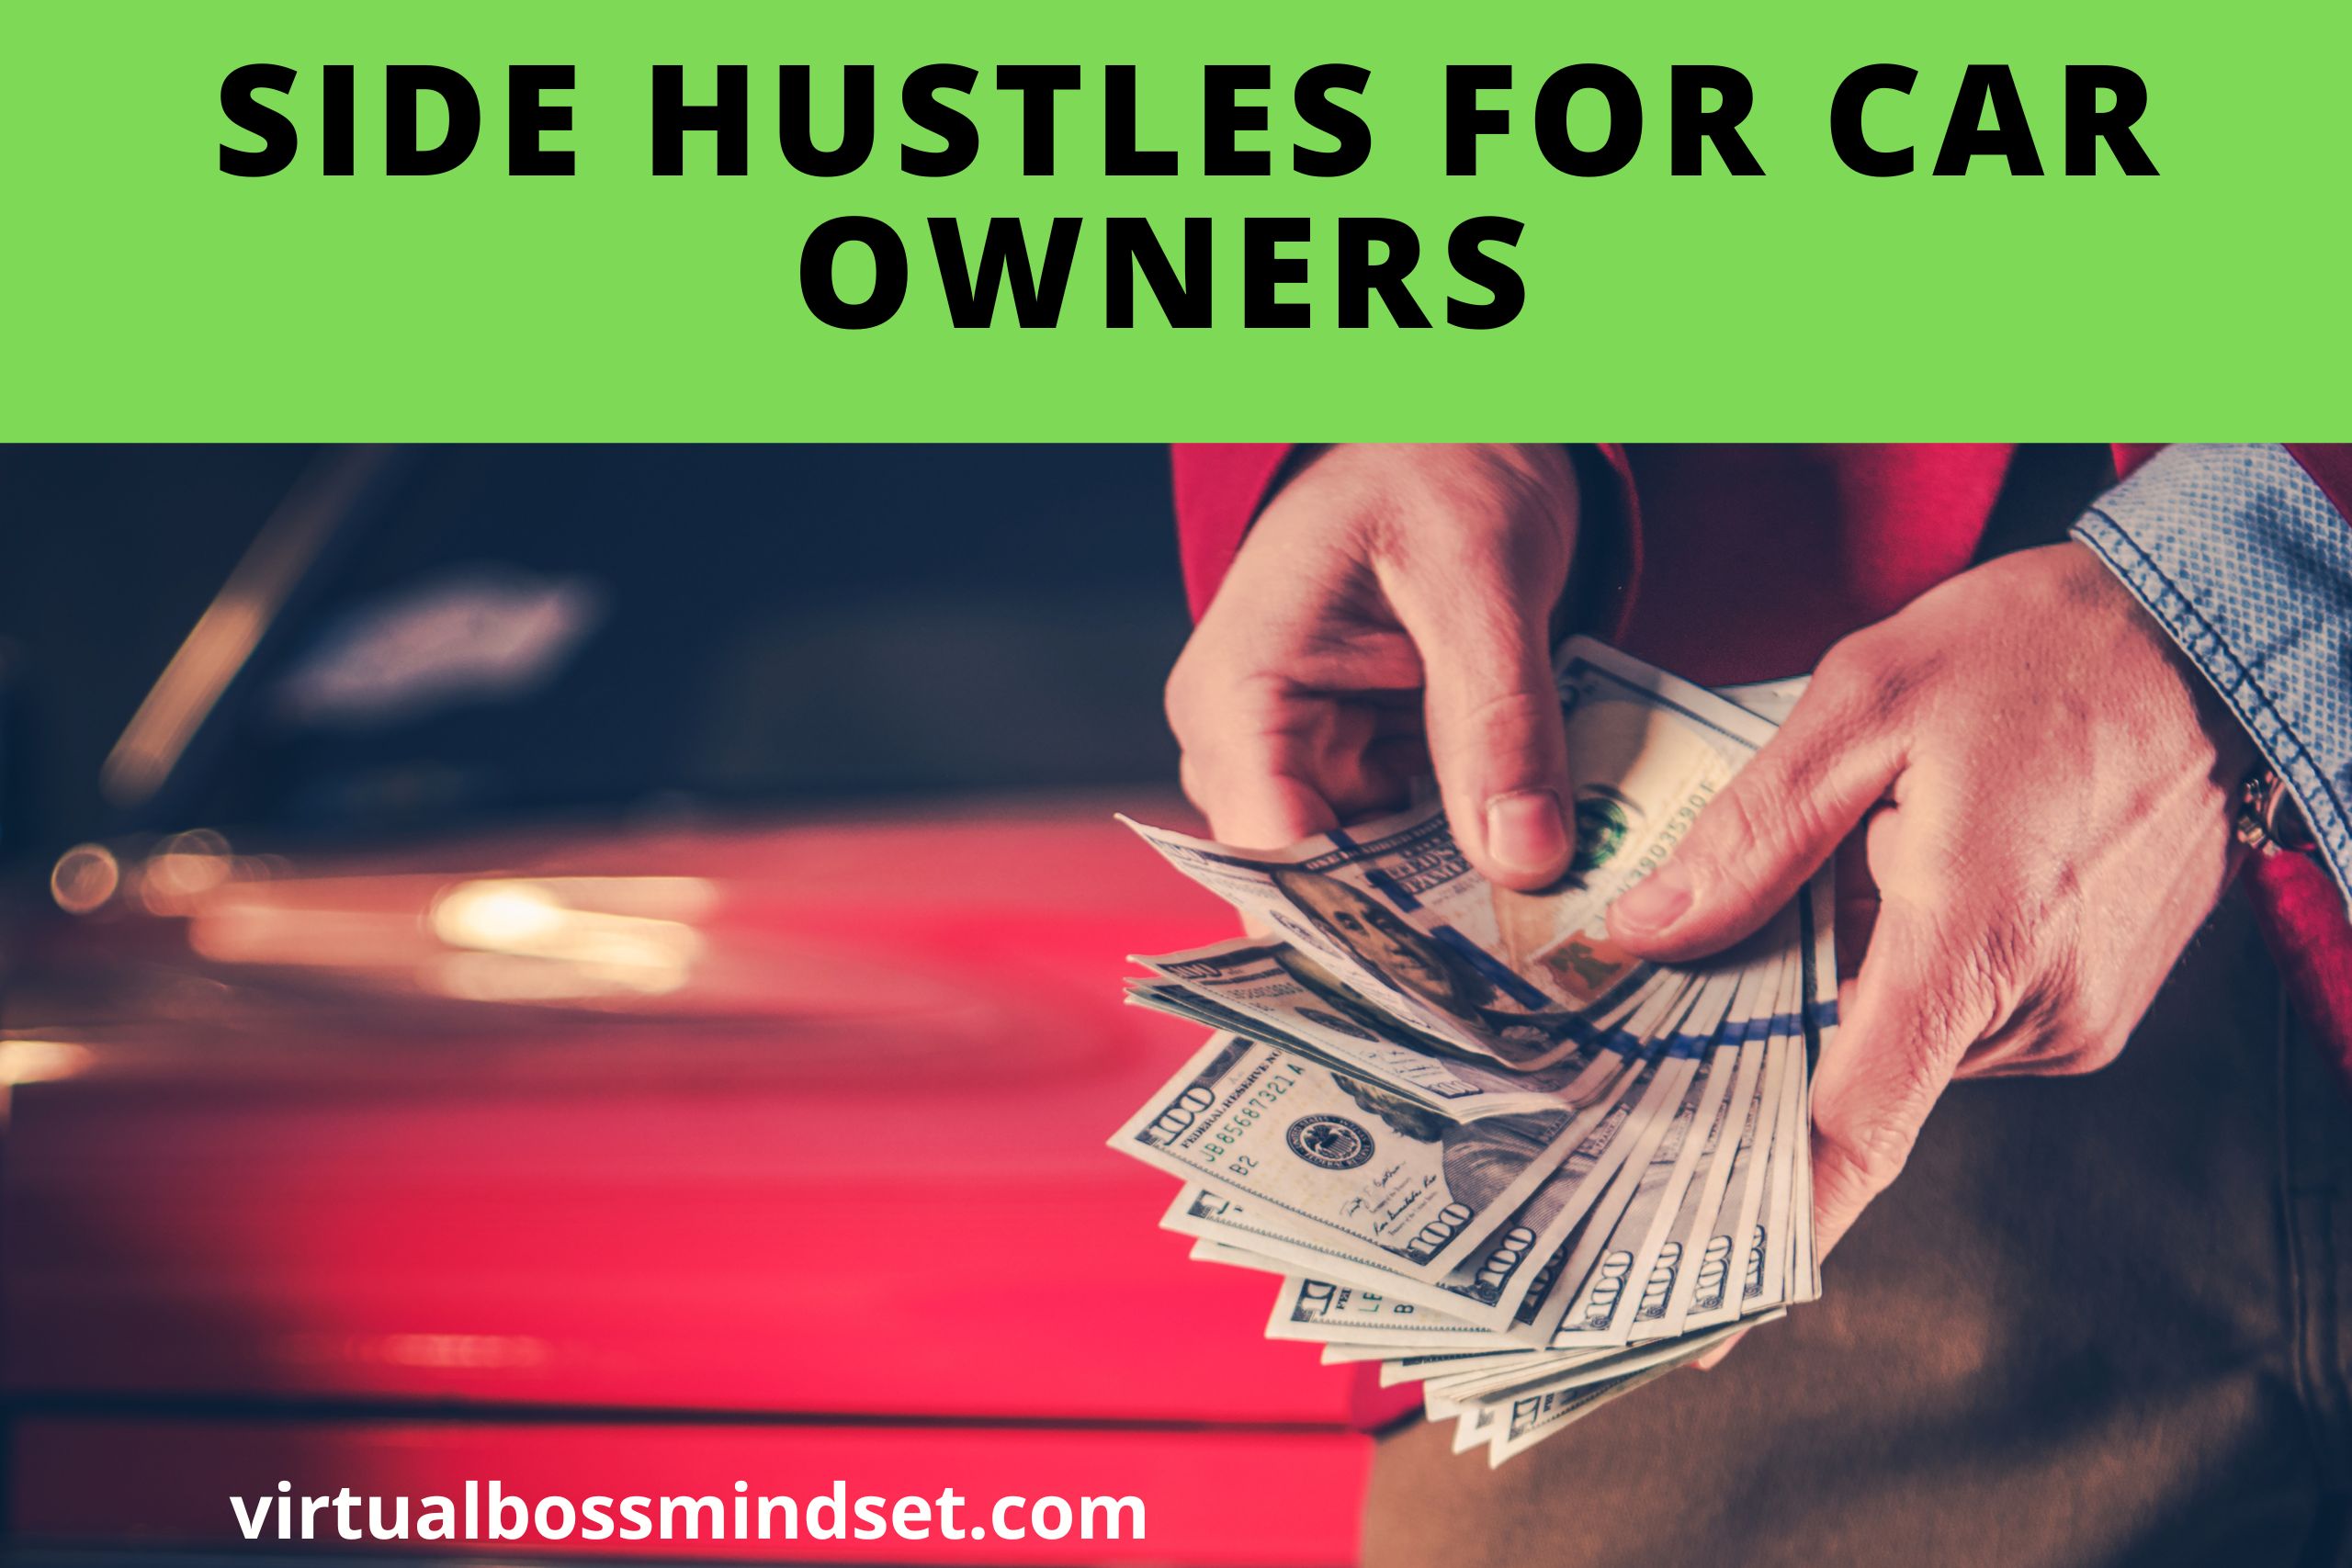 12 Side Hustles for Car Owners to Make Extra Money